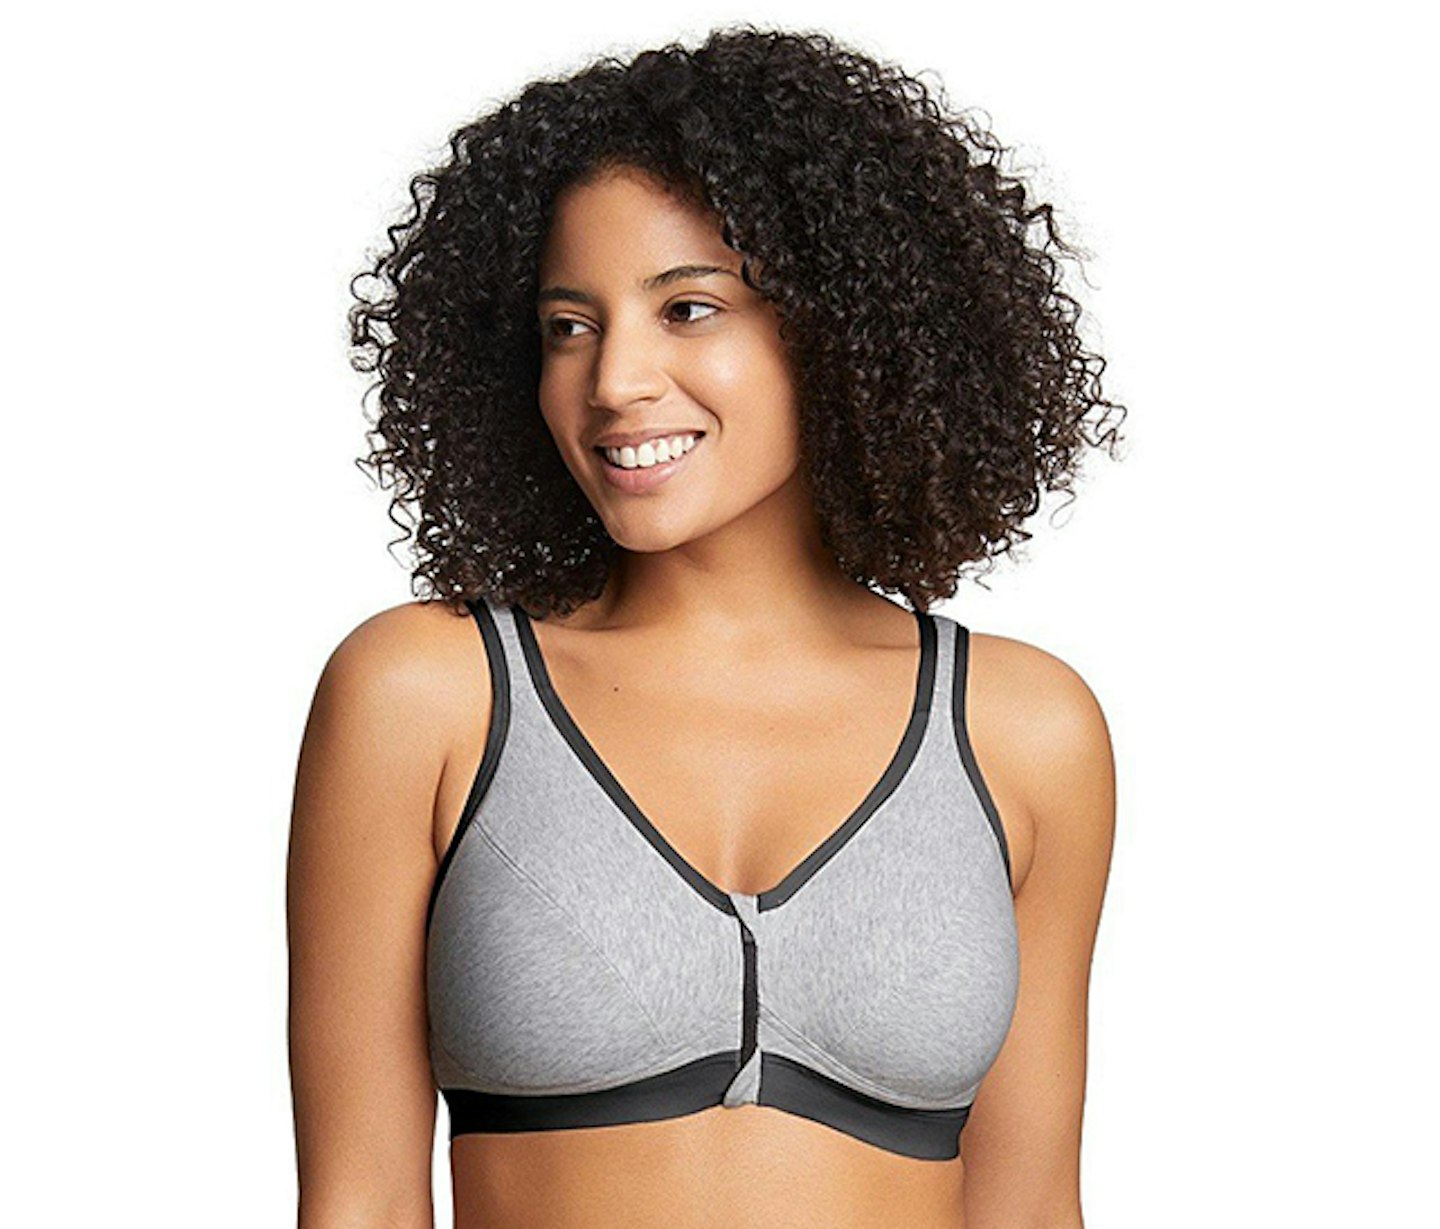 Wearing a bra after a mastectomy